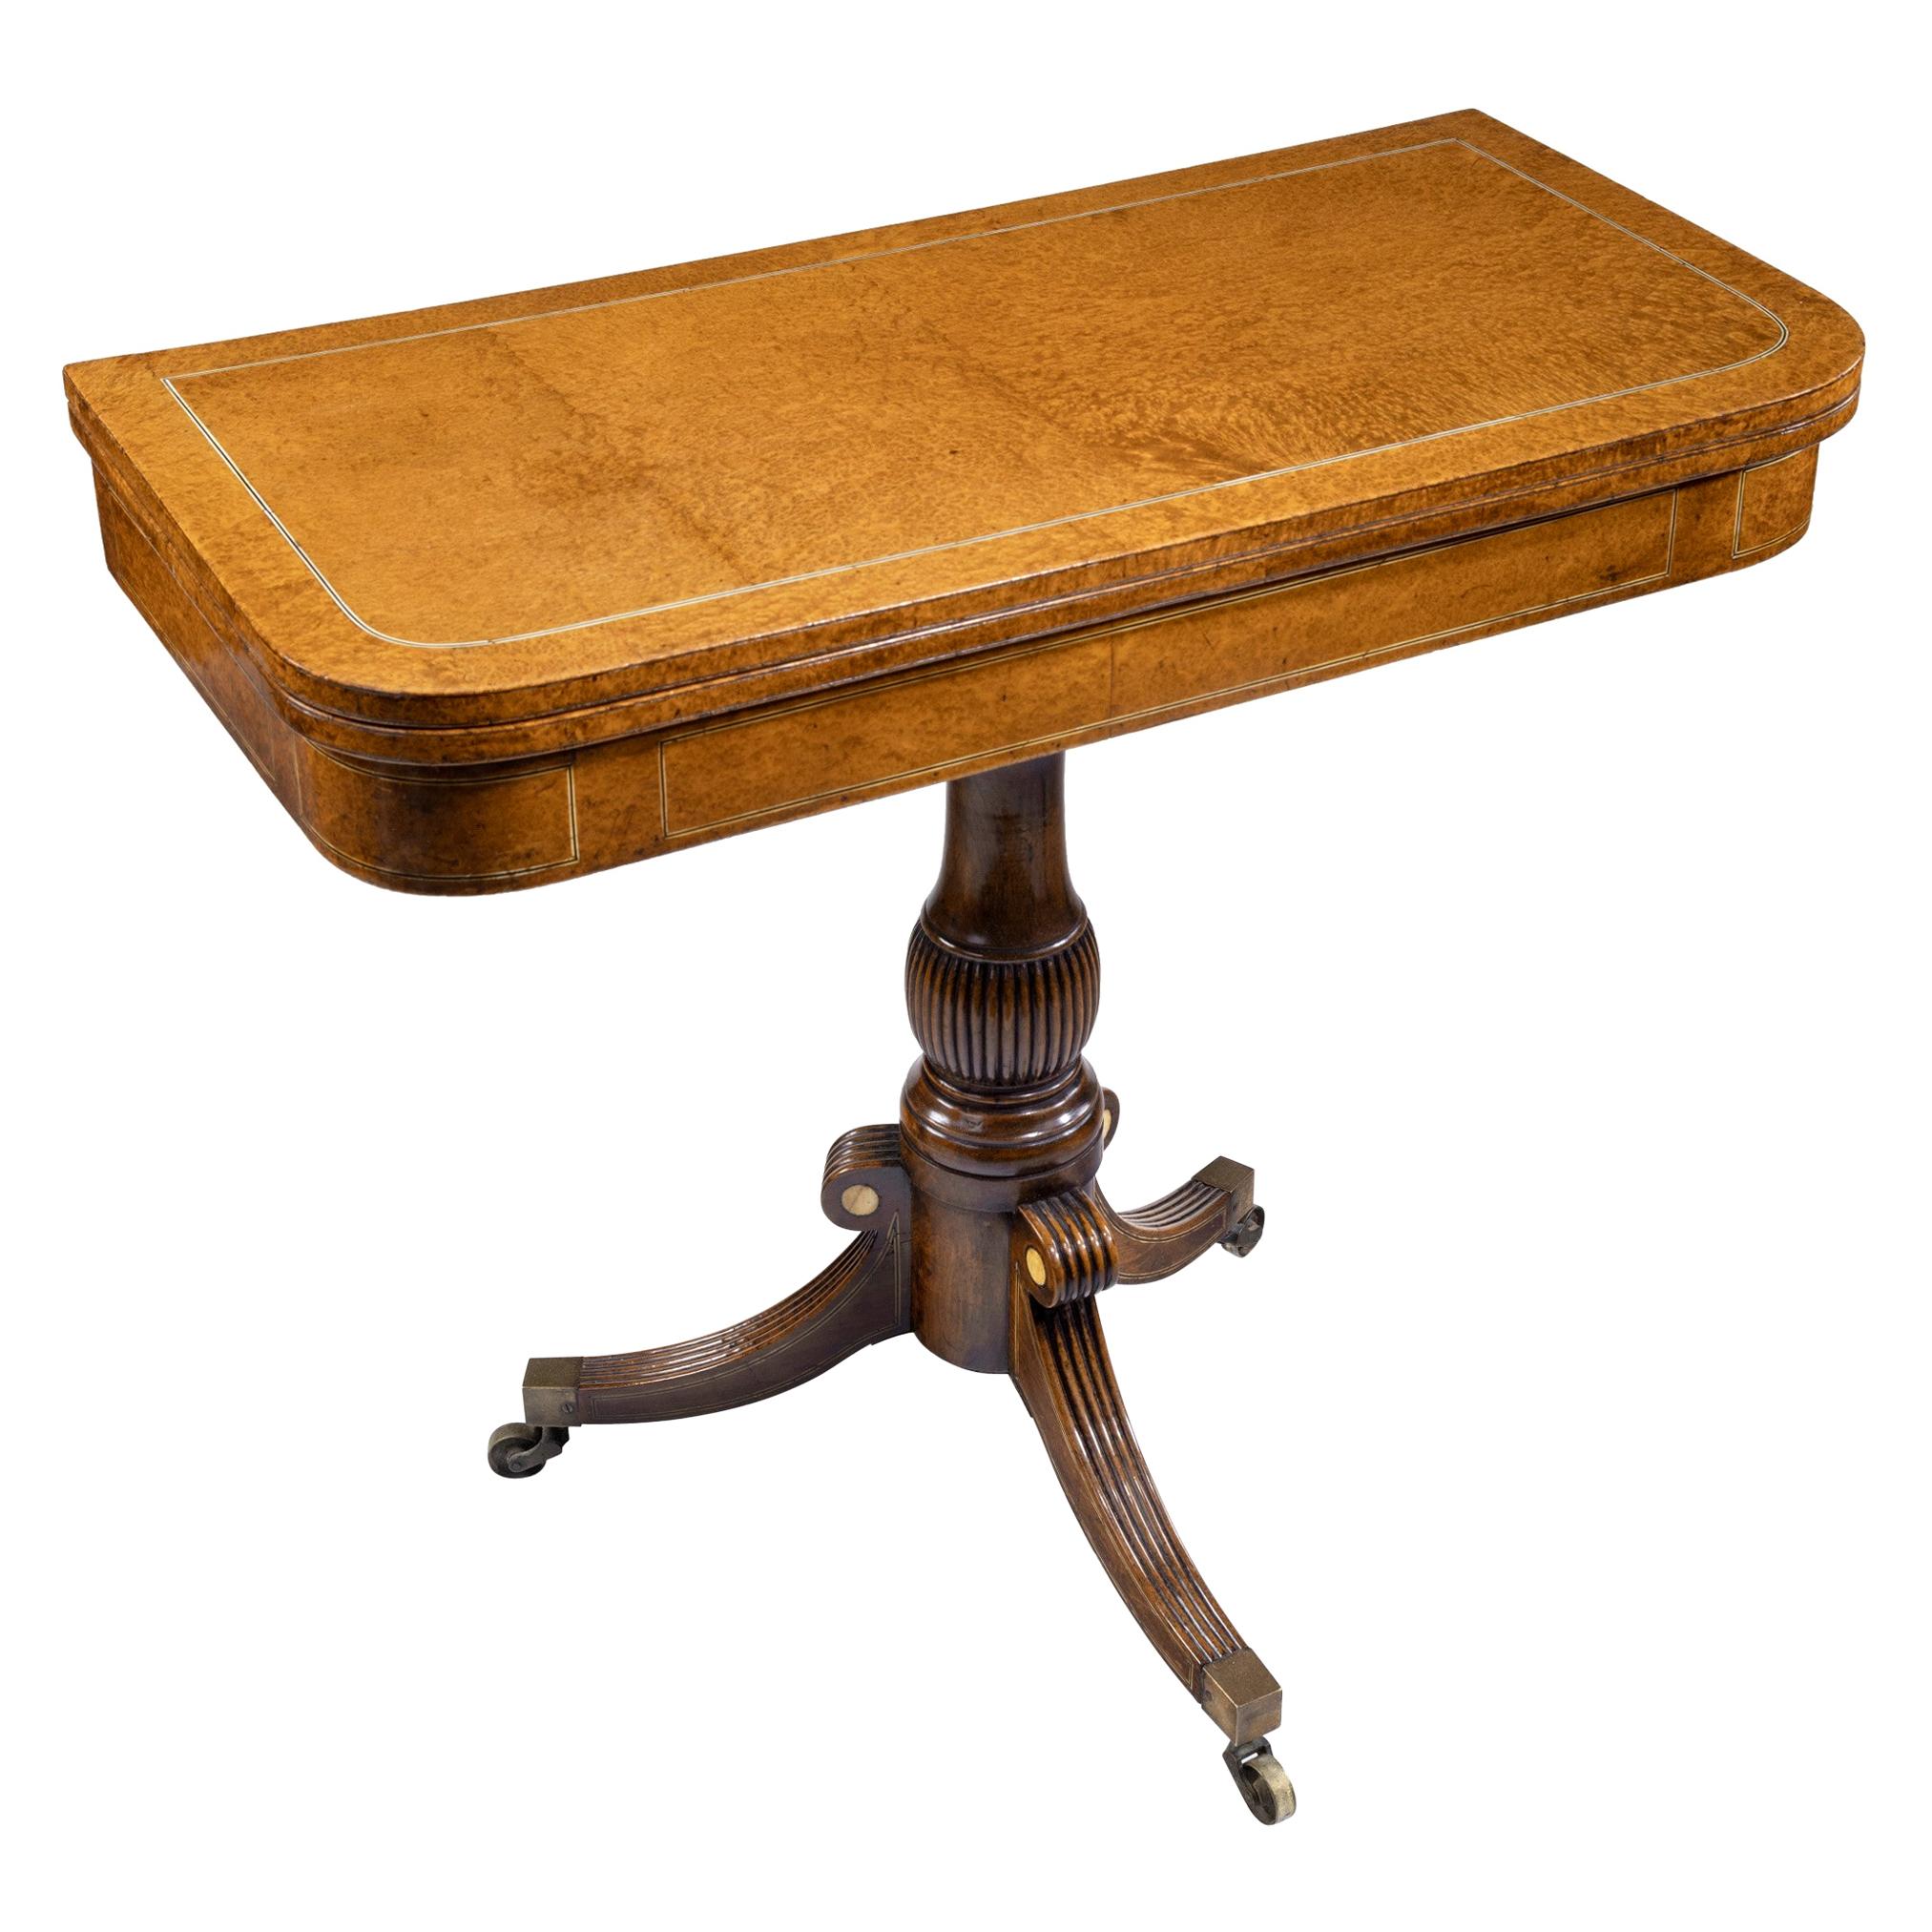 George iv Anglo-Chinese Amboyna Card Table